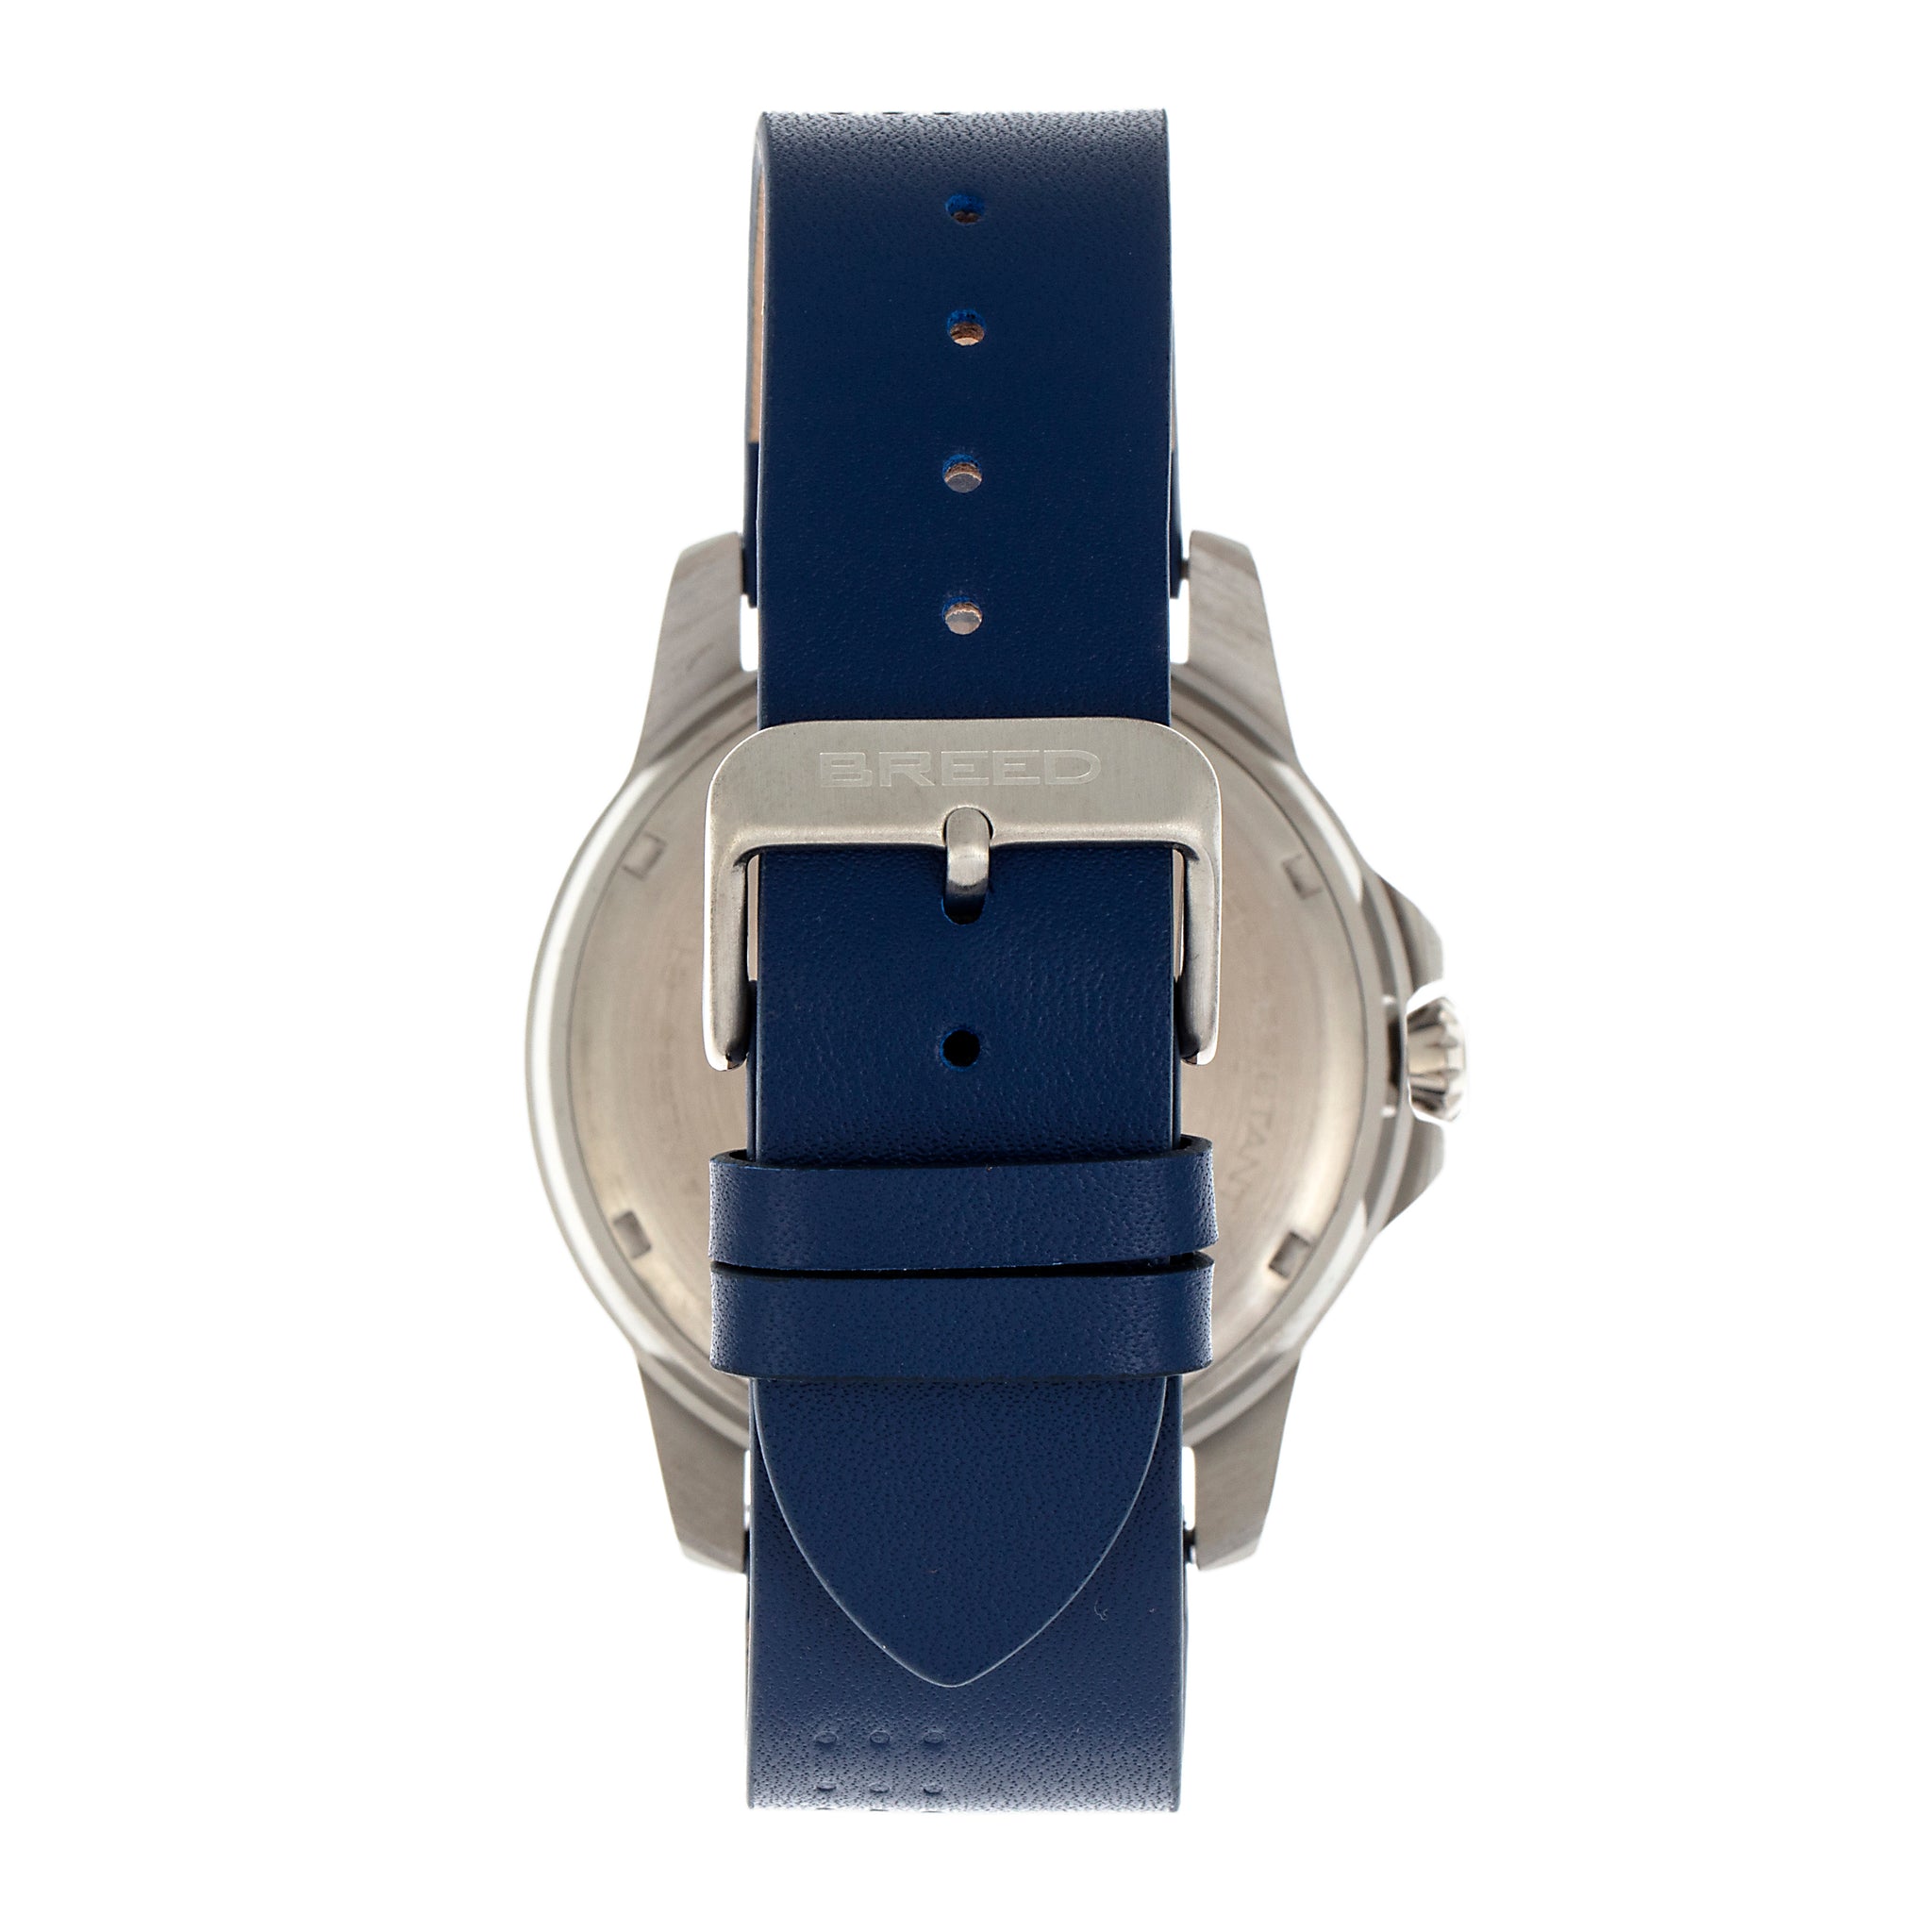 Breed Revolution Leather-Band Watch w/Date - Navy - BRD8306